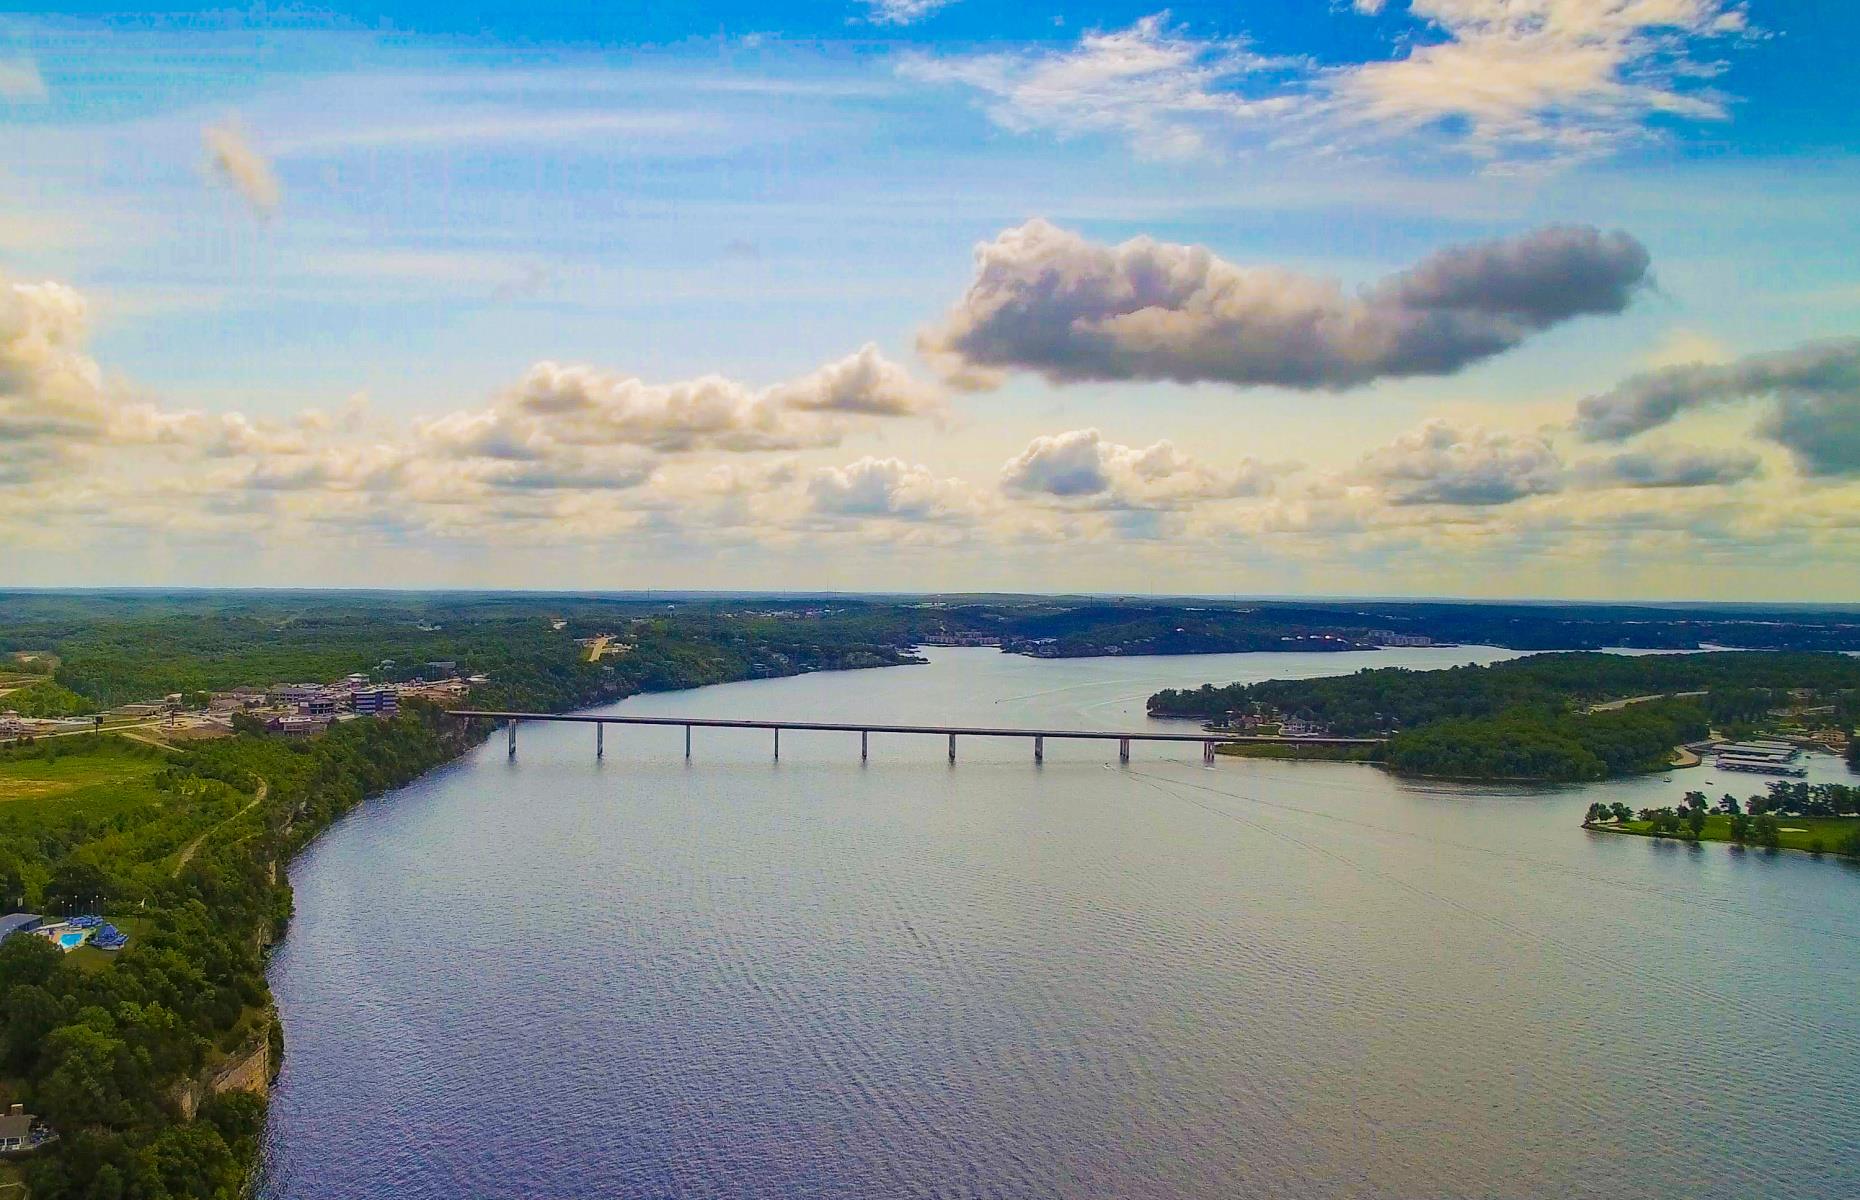 <p>Surprisingly, the Lake of the Ozarks is not a natural body of water – technically speaking, it’s a man-made lake. The massive lake is the result of the impounding of the Osage River to create a hydroelectric power system. The lake was first flooded in 1931 and the operation didn’t just create power, but a major tourist destination for boaters and lakeside vacationers.</p>  <p><strong><a href="https://www.loveexploring.com/galleries/69010/beautiful-lakes-you-wont-believe-are-man-made">Discover more beautiful lakes you won't believe are man-made</a></strong></p>